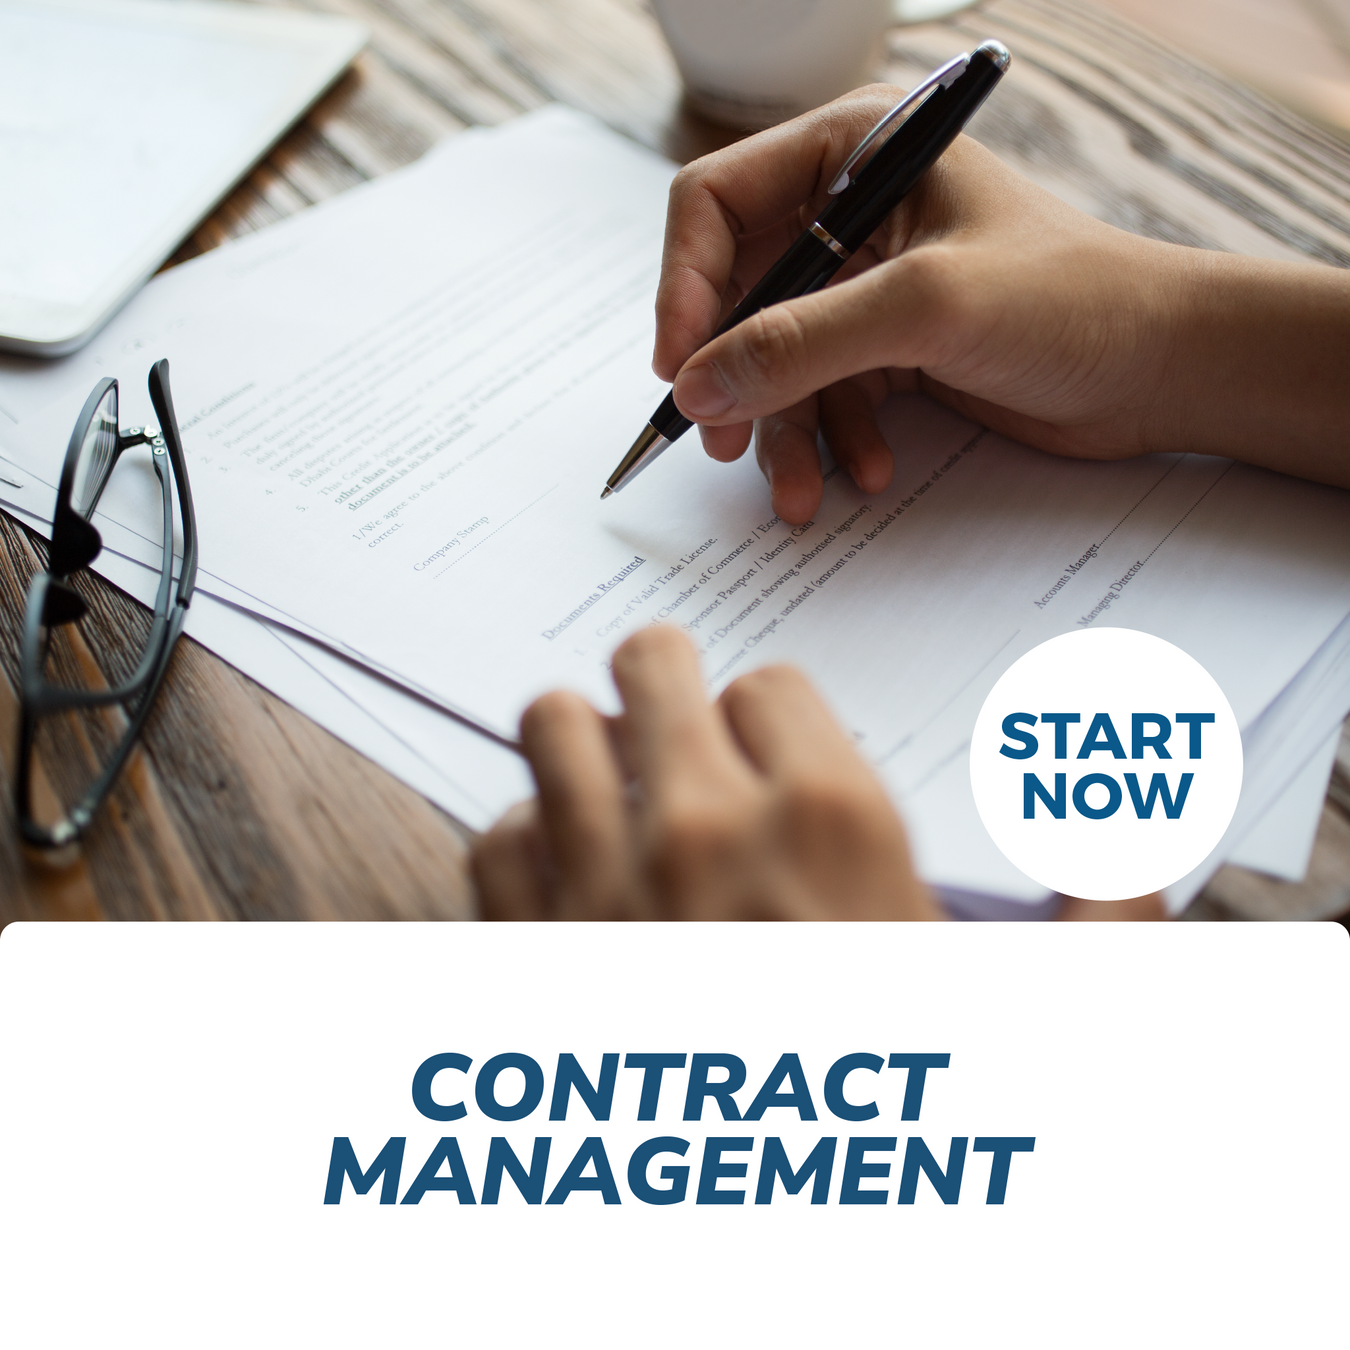 Contract Management Courses